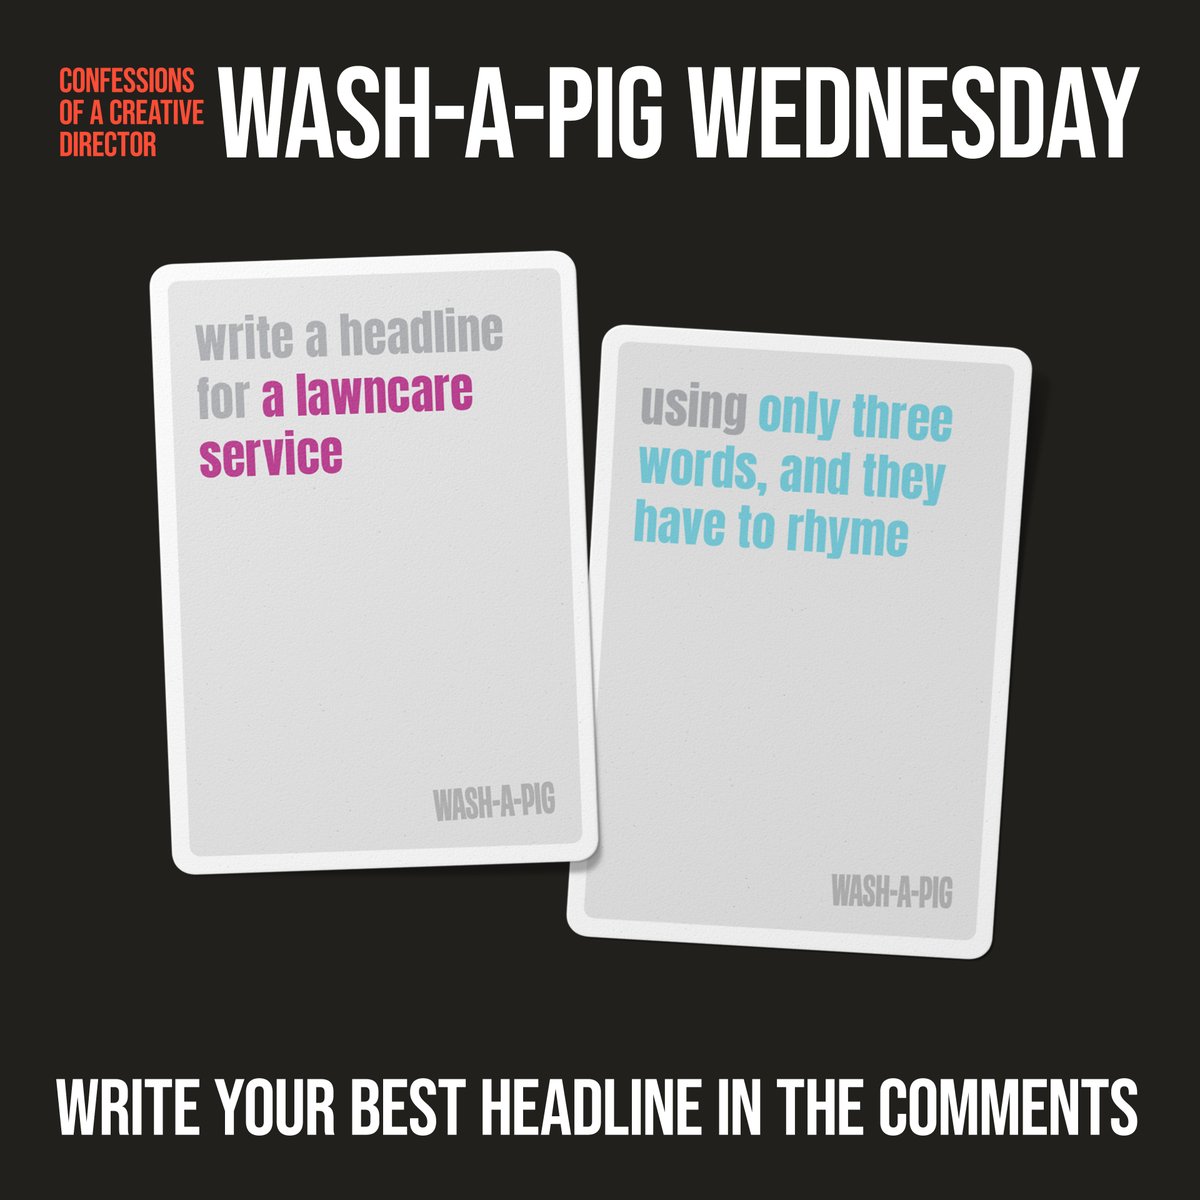 We're playing with Confessions of a Creative Director today, and the best headline in the comments wins Jaime Cabrera's book 'What's the Big Idea' and a deck of Wash-a-Pig. The winner will be chosen this Friday, so get your lines in now.

#copywriting #creativeadvertising